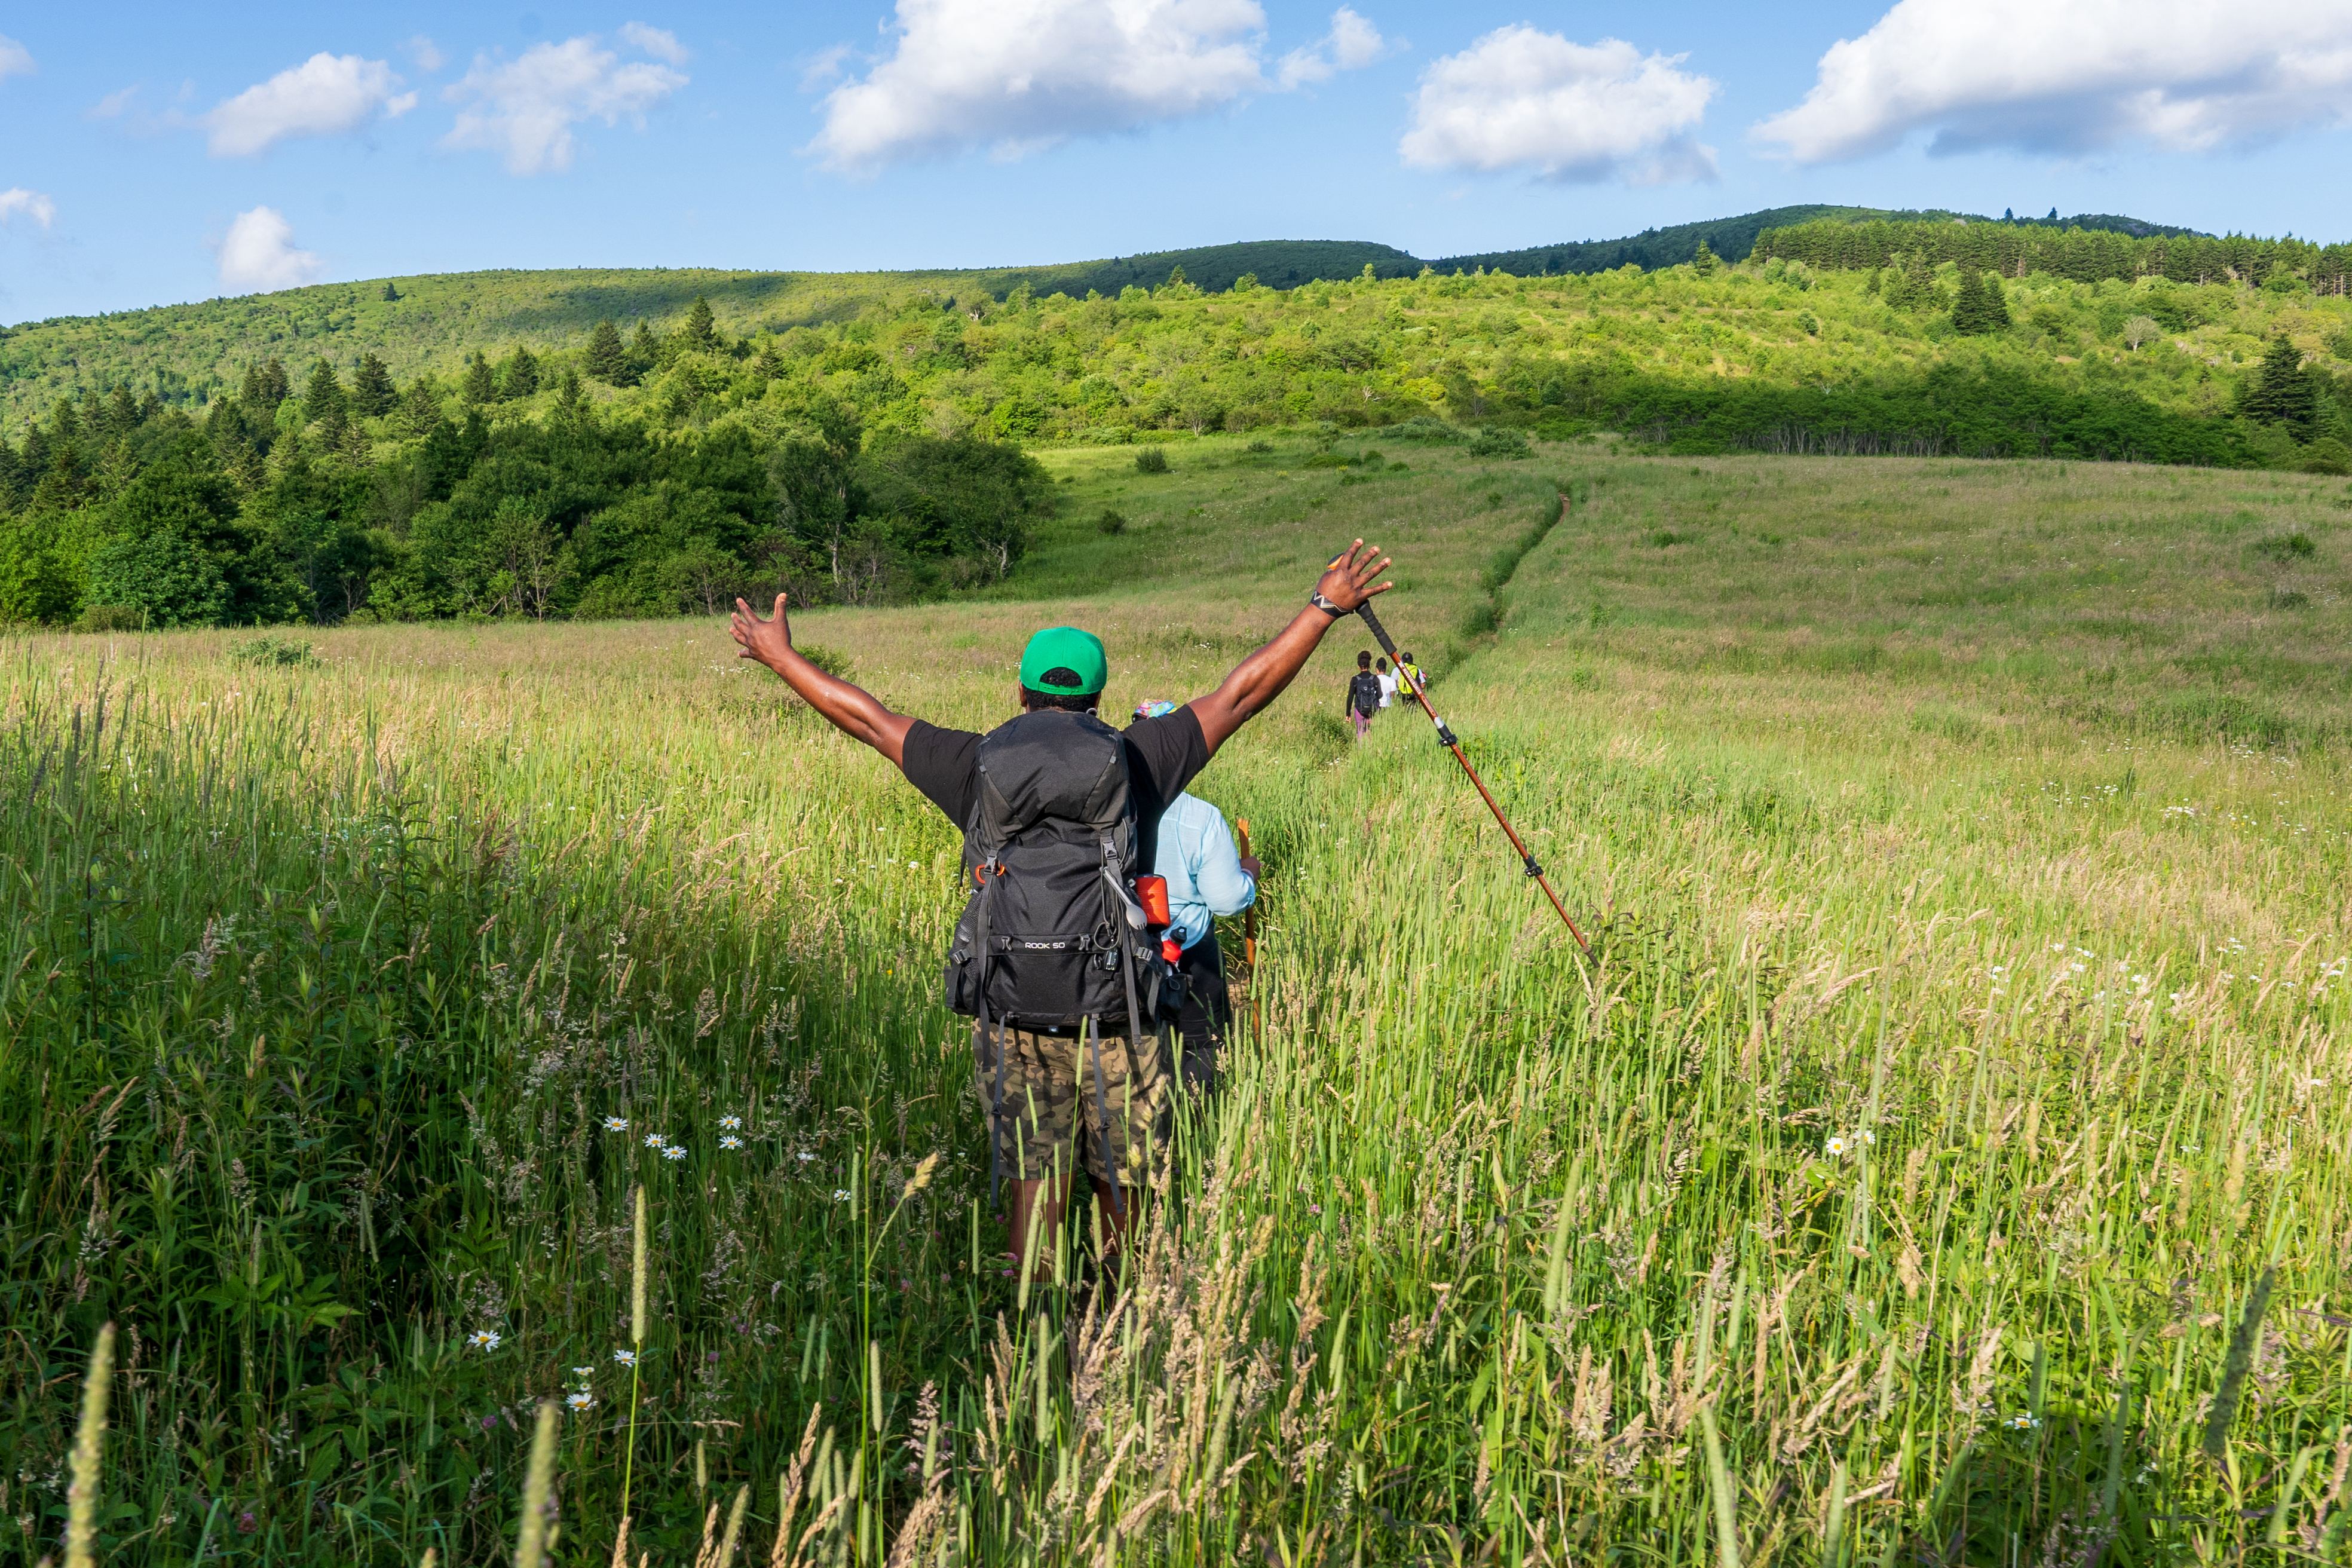 Hiker is raising hands victoriously while walking through a grassy plain.